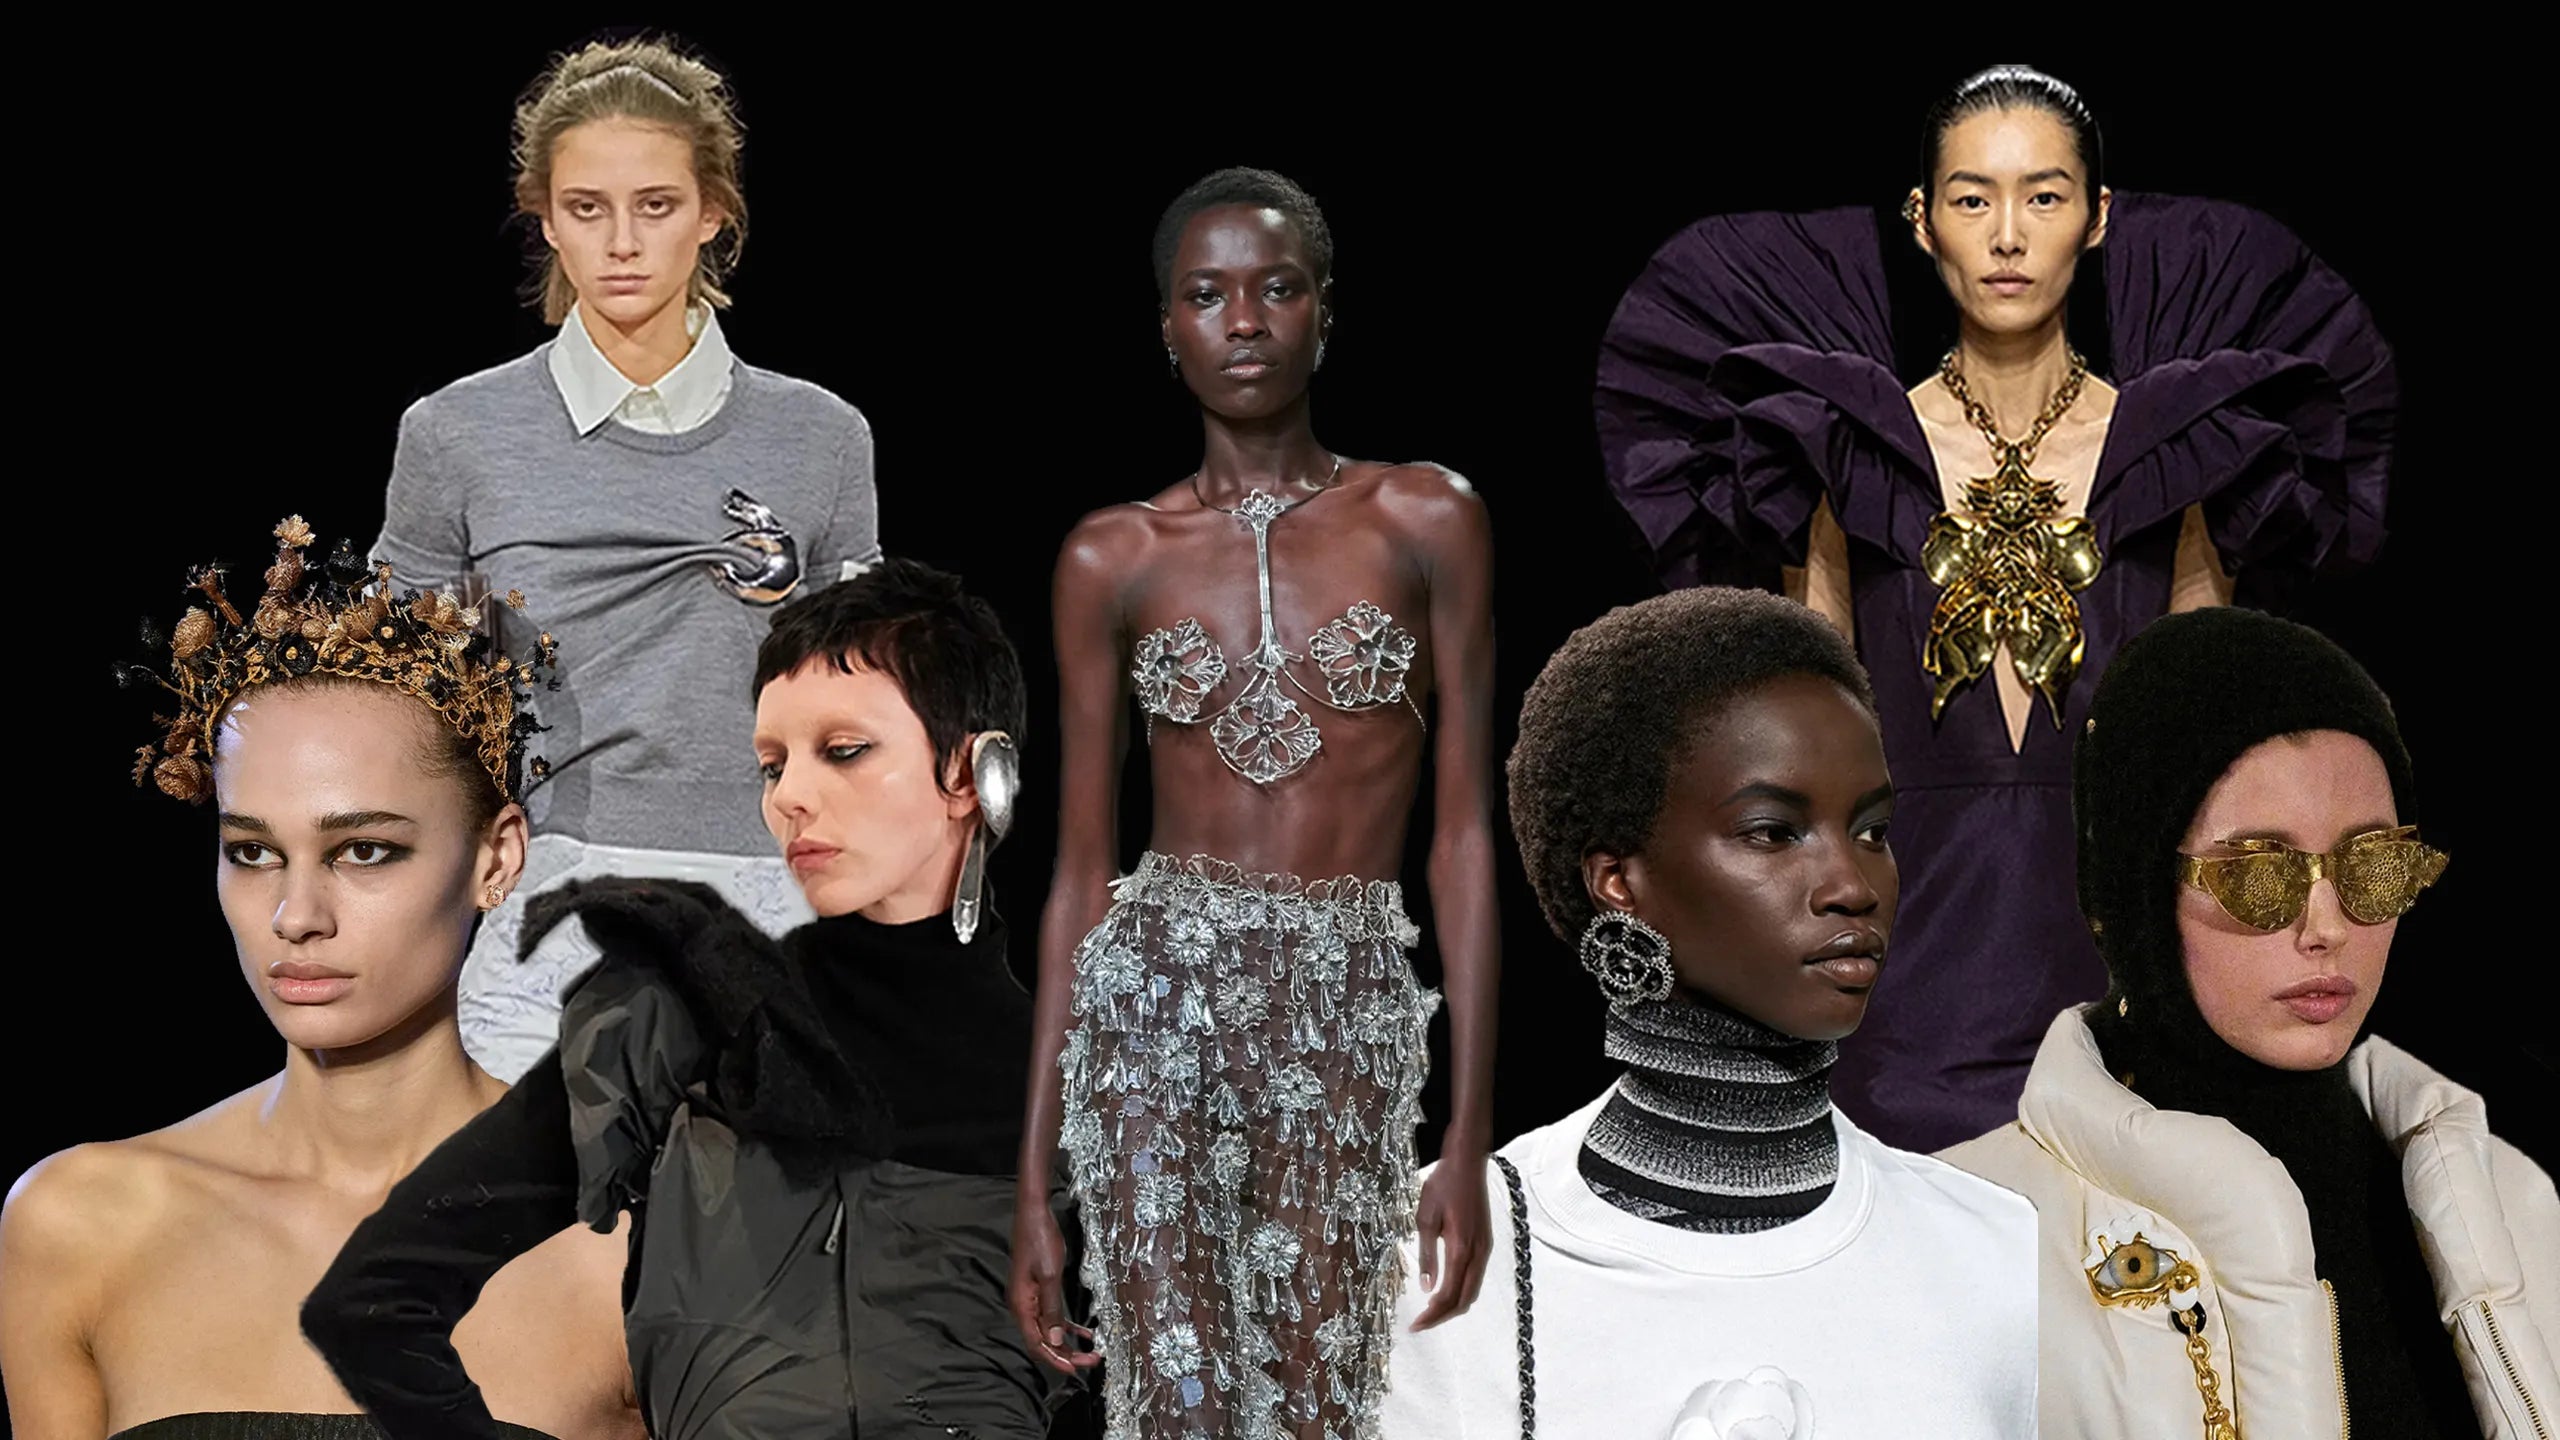 Dazzling in Style: What are the Jewelry Trends for 2023?